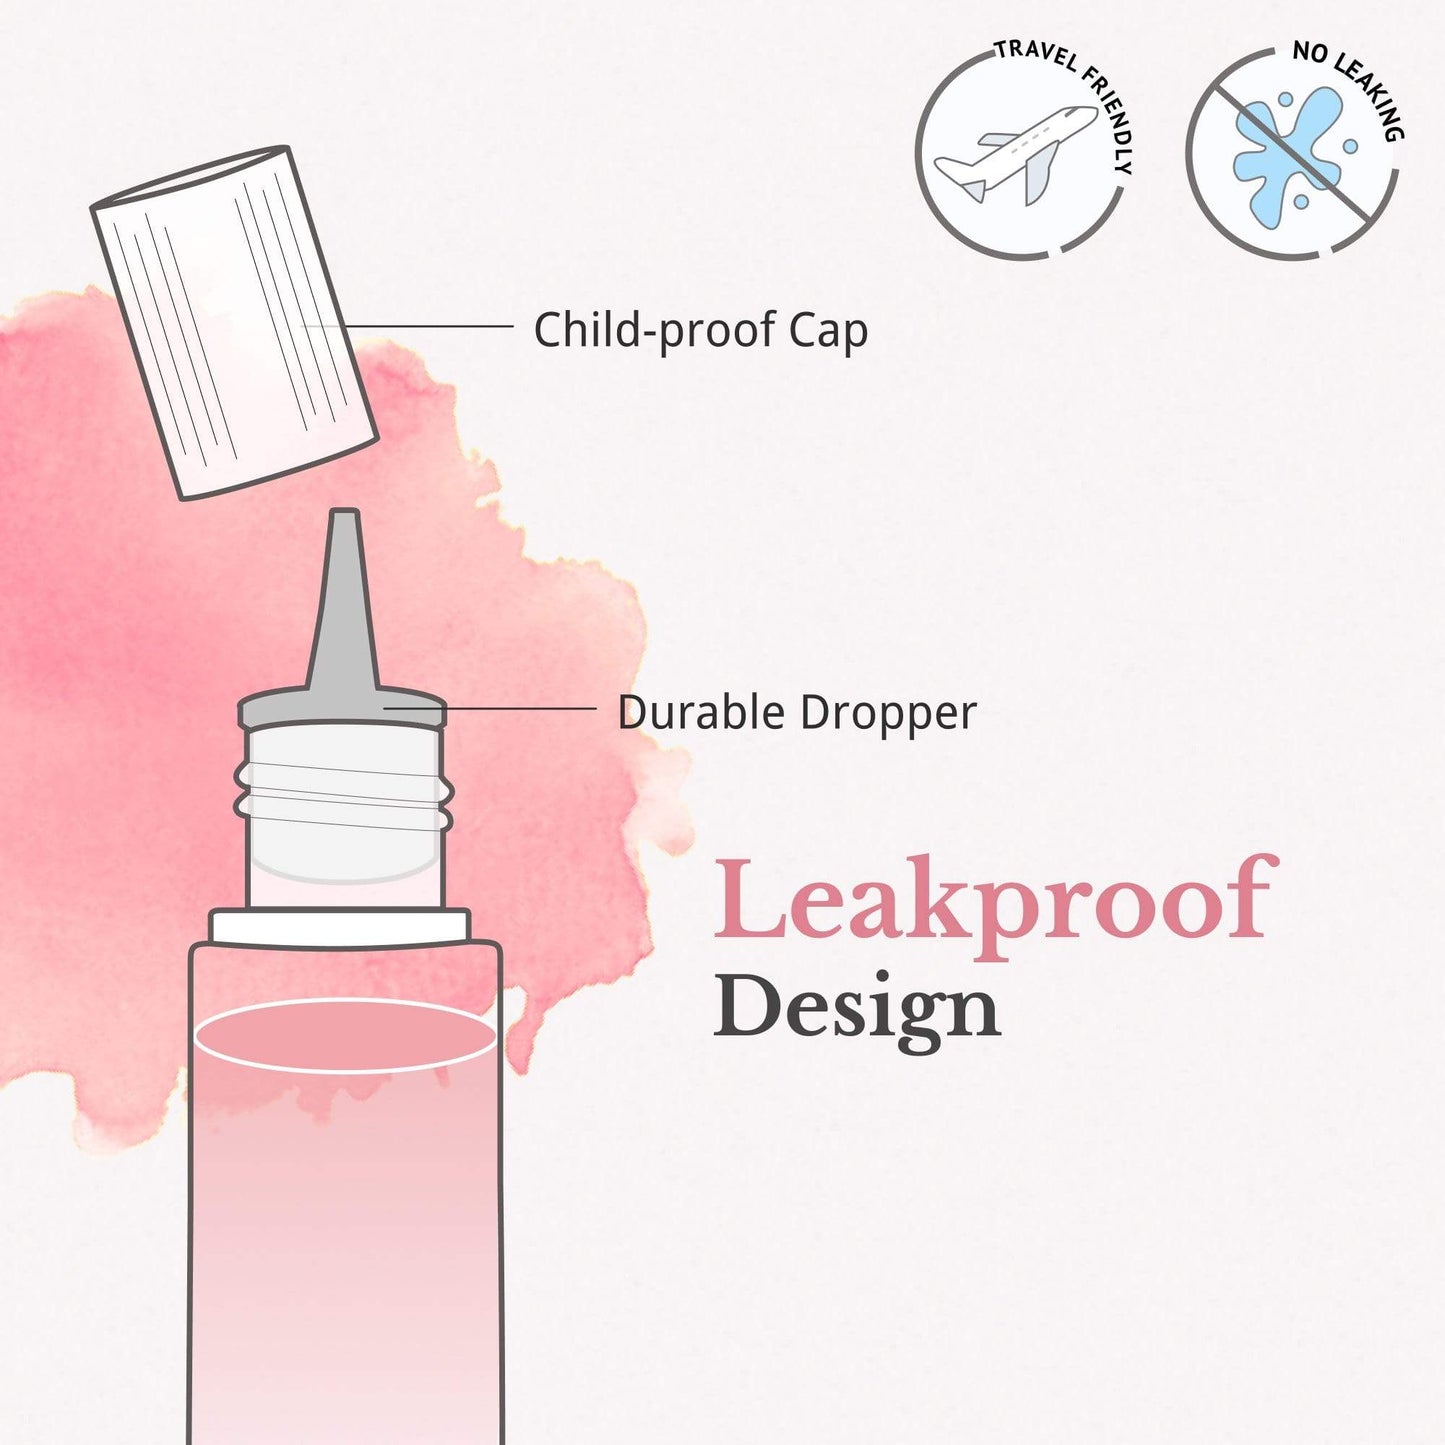 Leak proof design with child proof cap and durable dropper. travel friendly